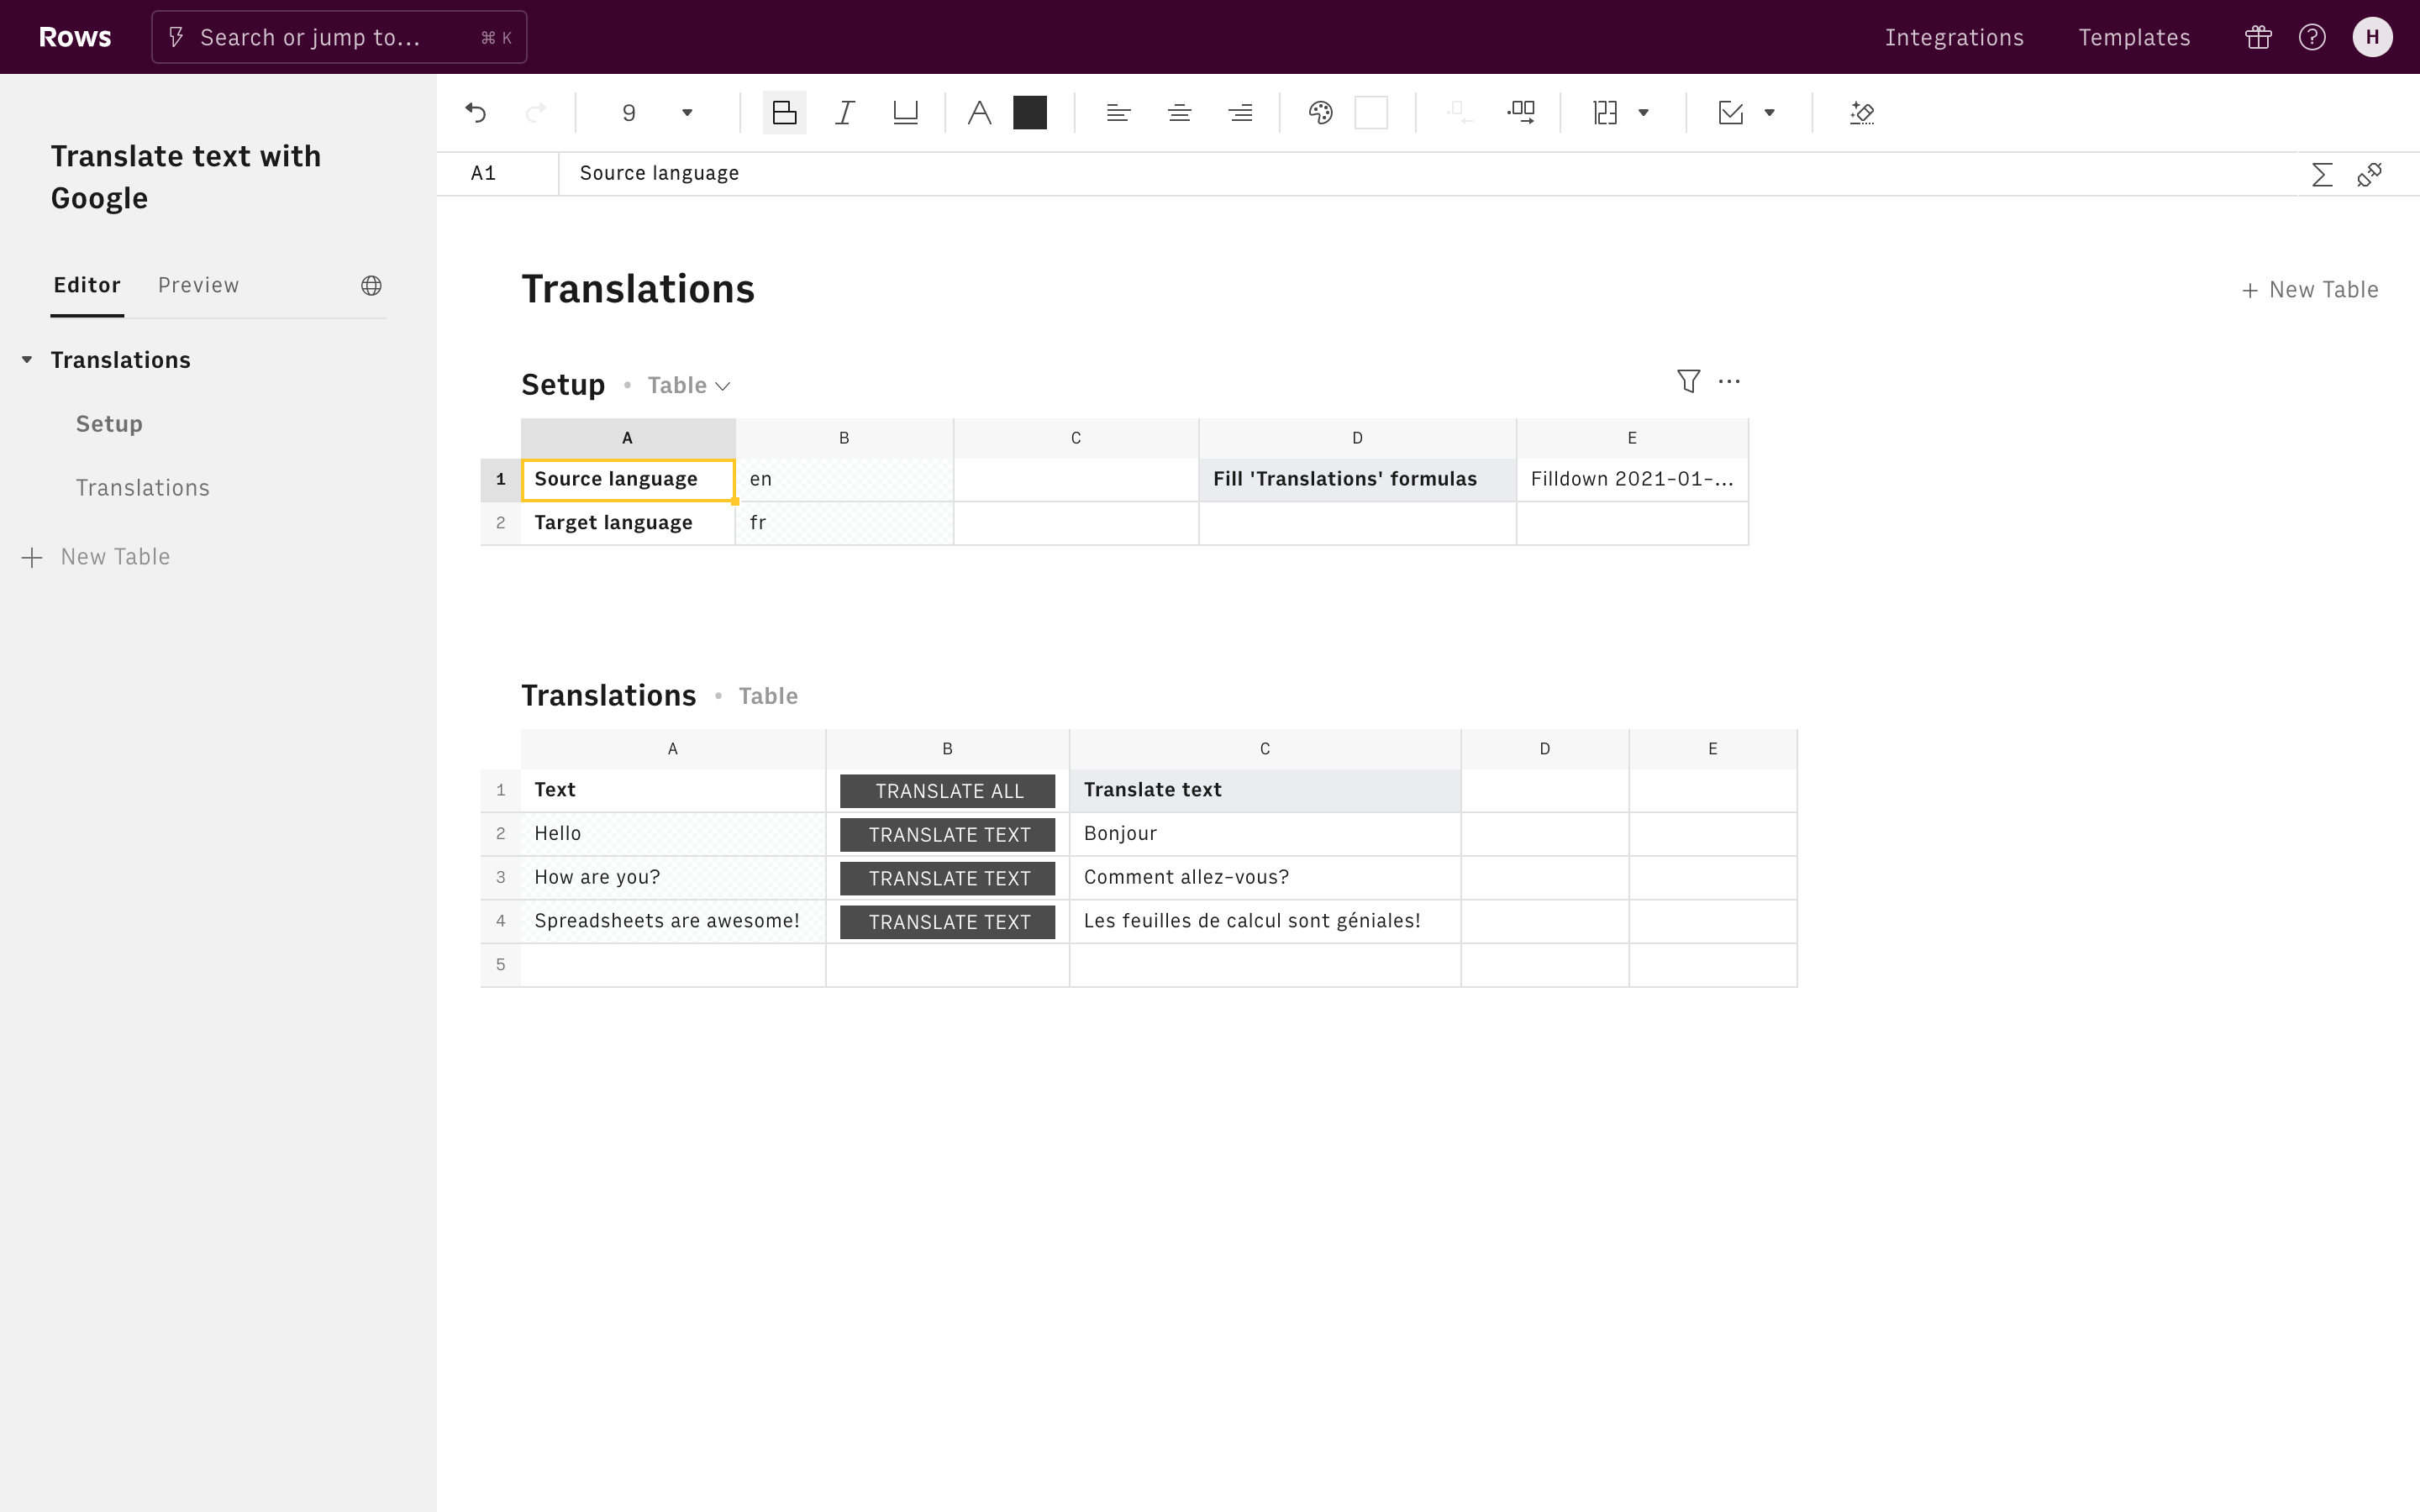 Translate text with Google Editor